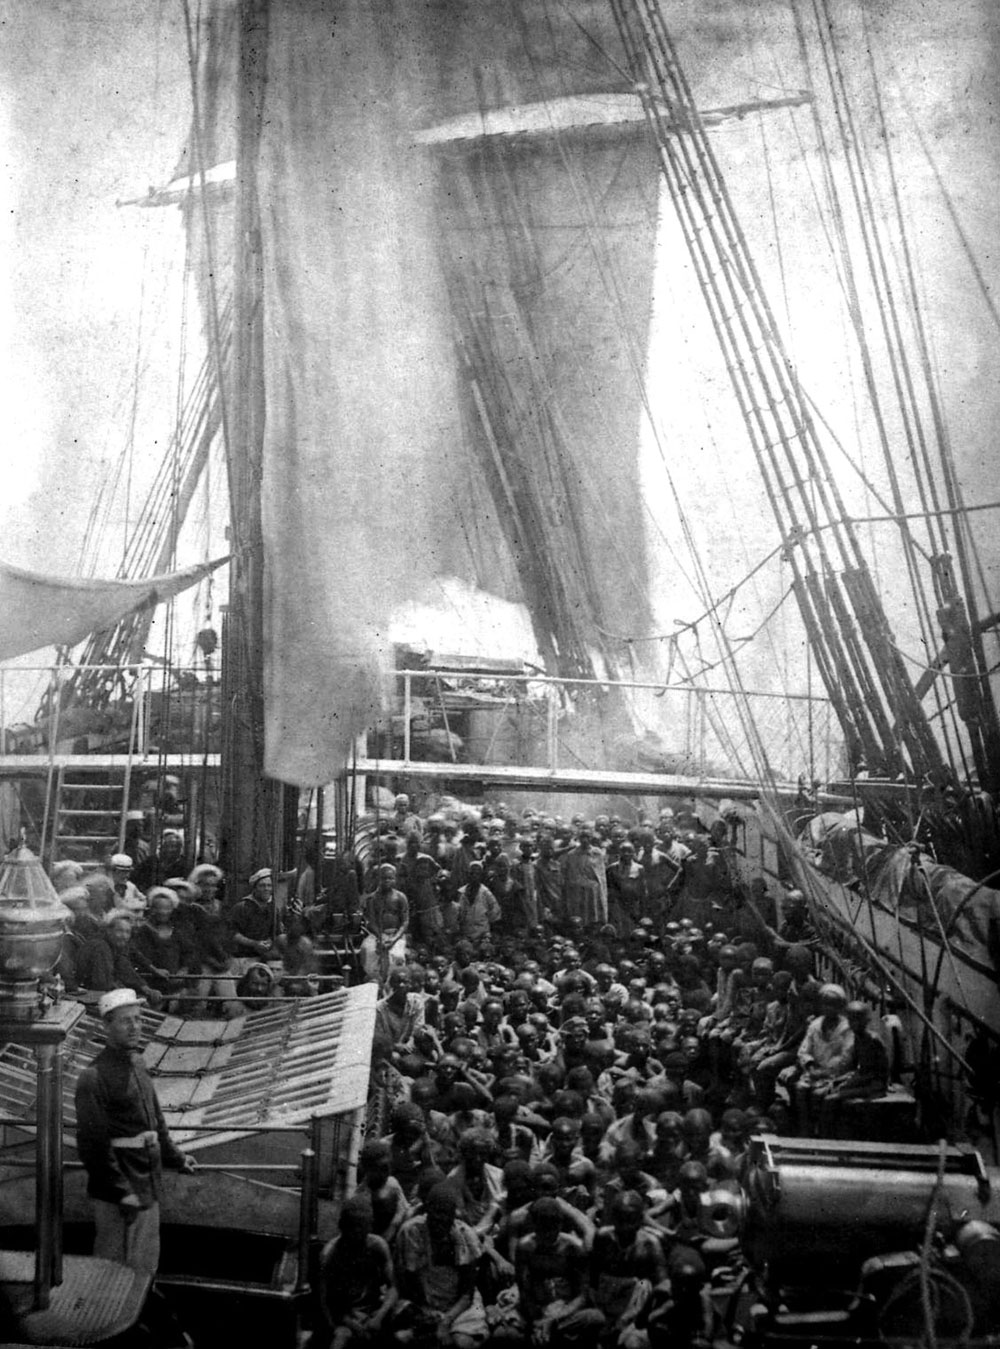 Rescued east African slaves aboard HMS Daphne, a British Royal Navy vessel involved in anti-slave trade activities in the Indian Ocean